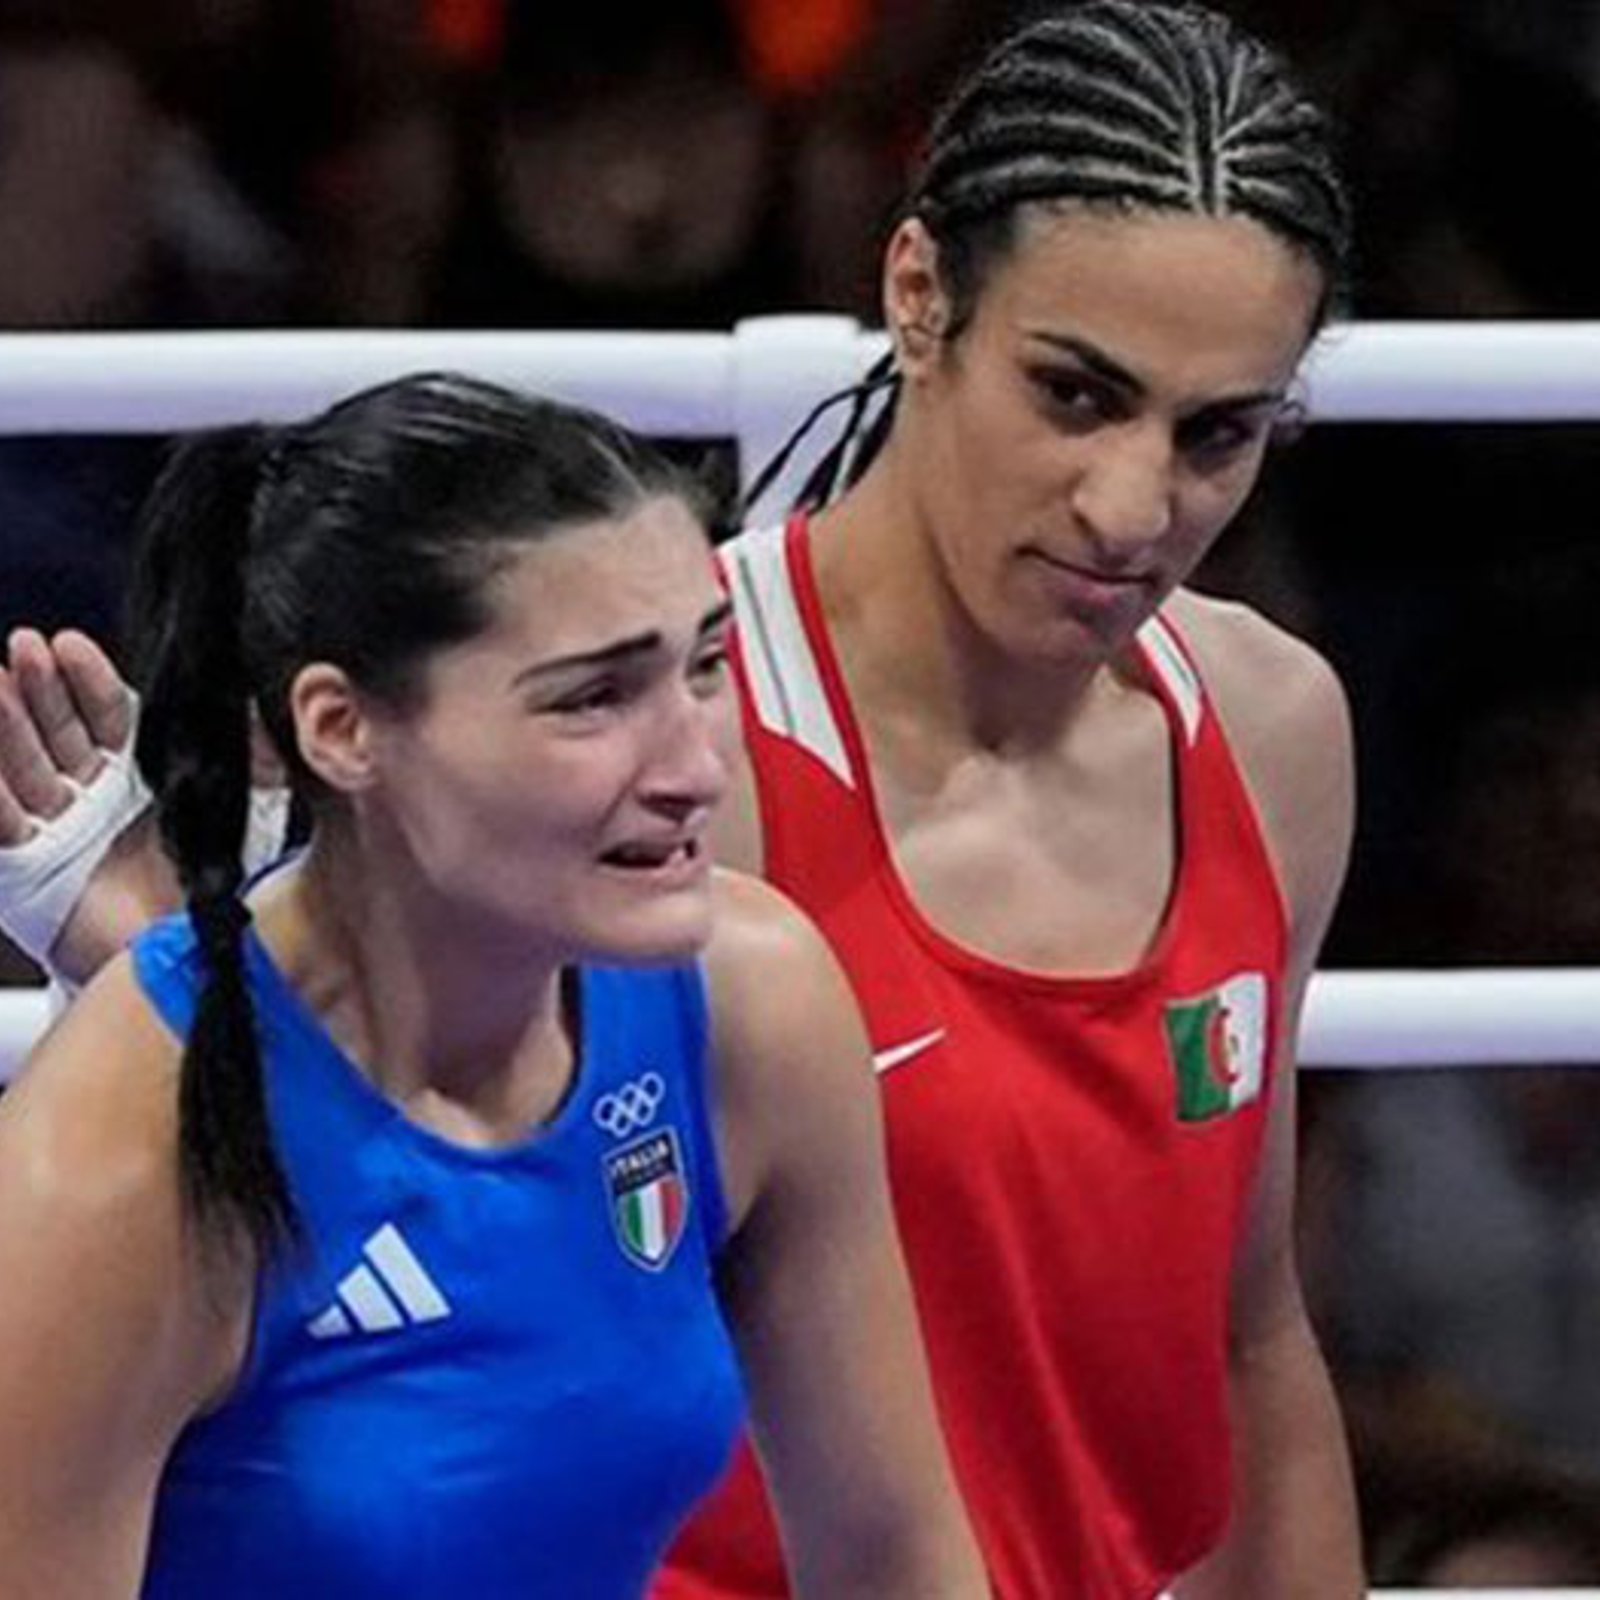 Entire sporting world is turned upside down today after ugly win in Olympic boxing